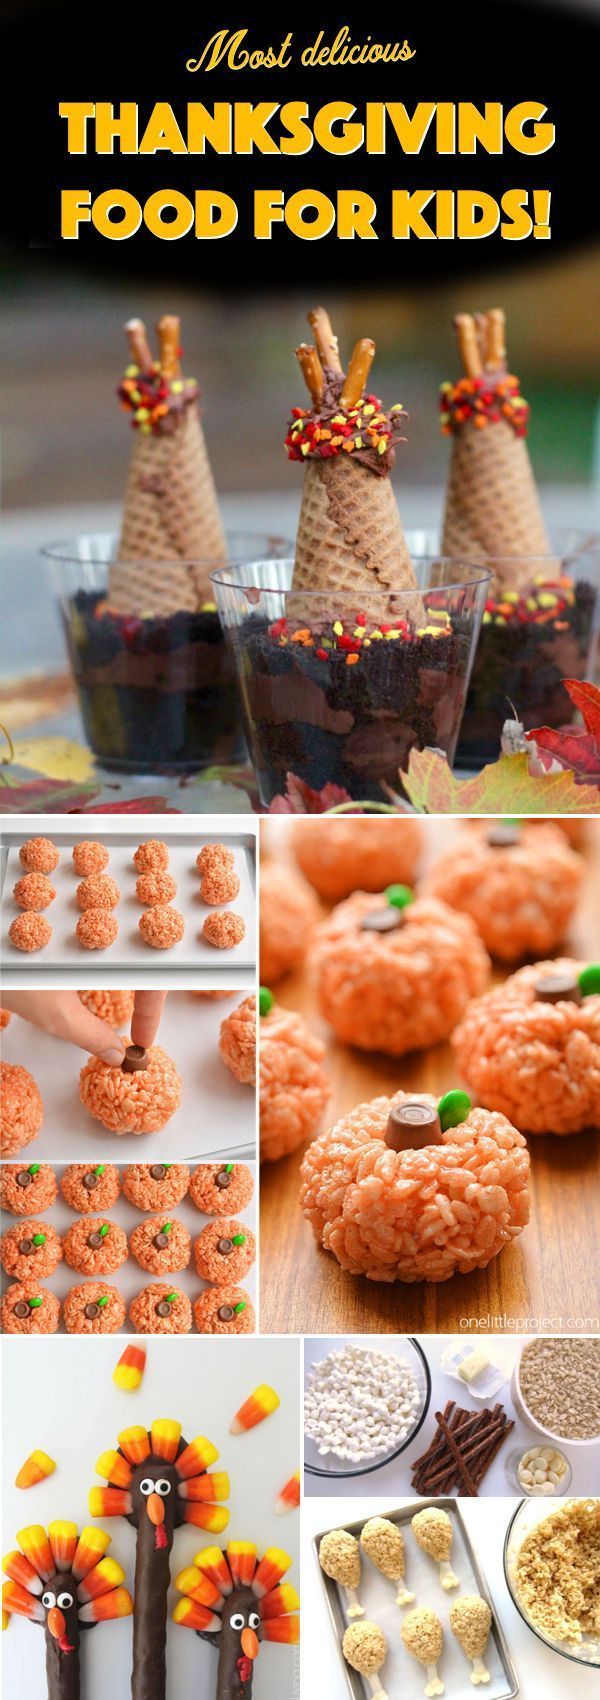 The Most Delicious Thanksgiving Food for Kids! -   17 fall recipes for kids
 ideas